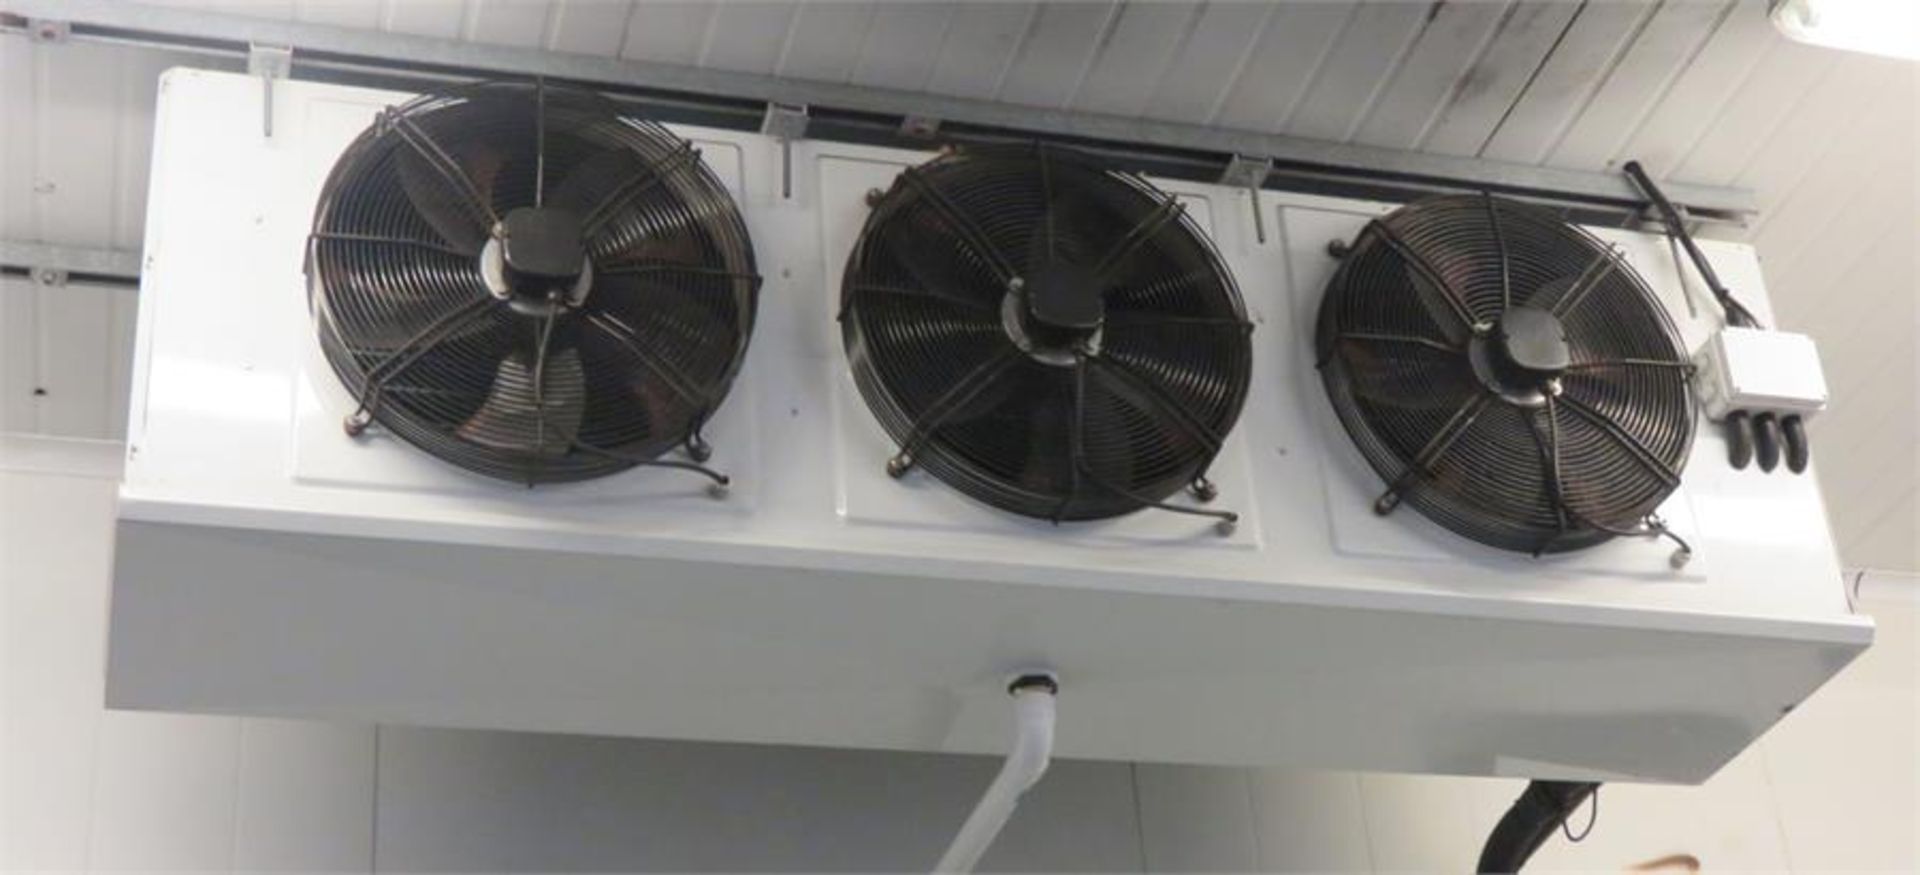 FAN EVAPORATORS AND CONDENSERS - Image 2 of 5